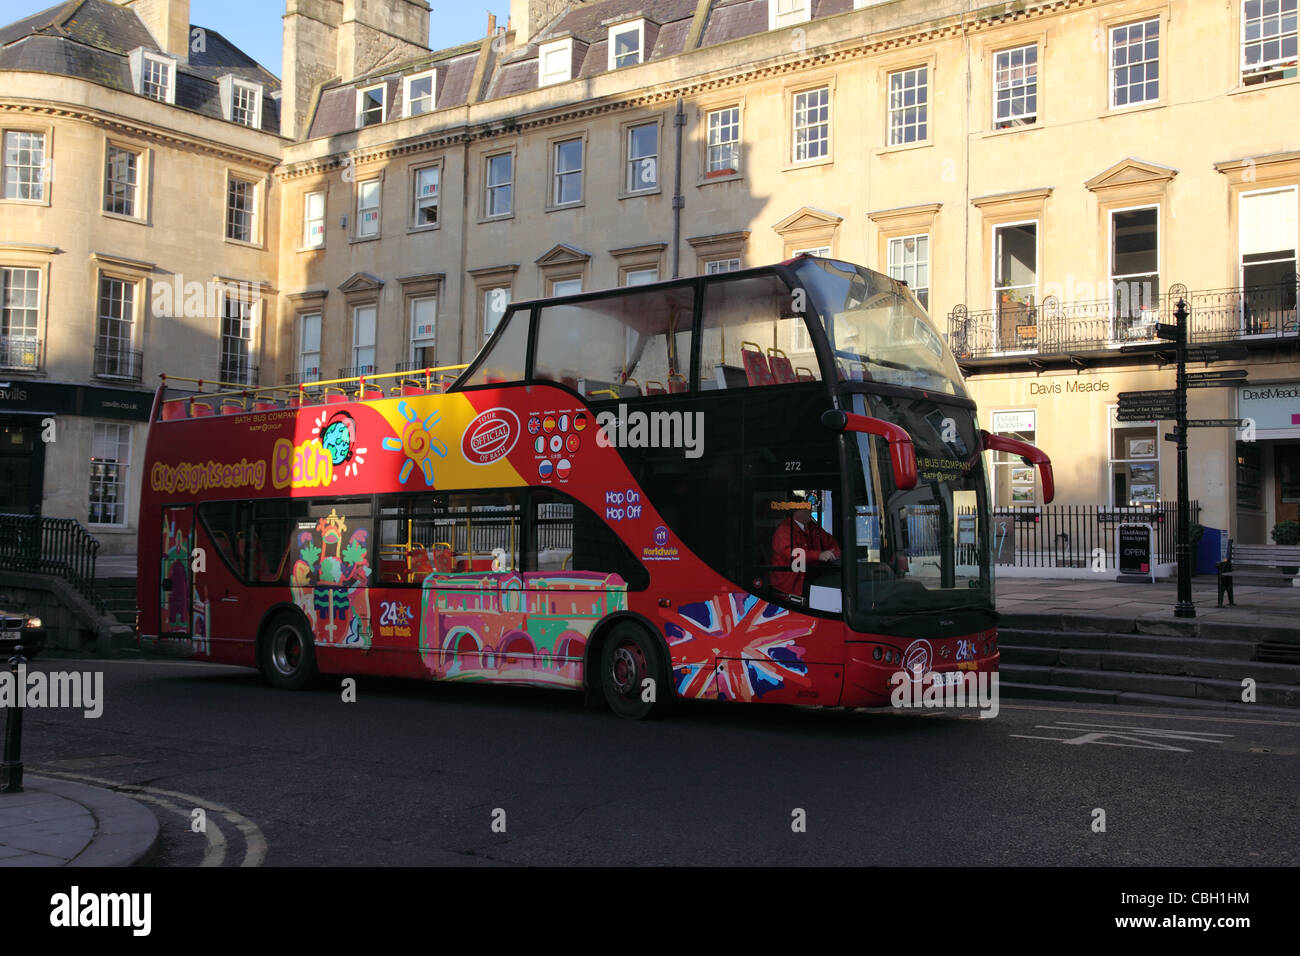 Red city sightseeing tour bus, Bath city centre, England Stock Photo